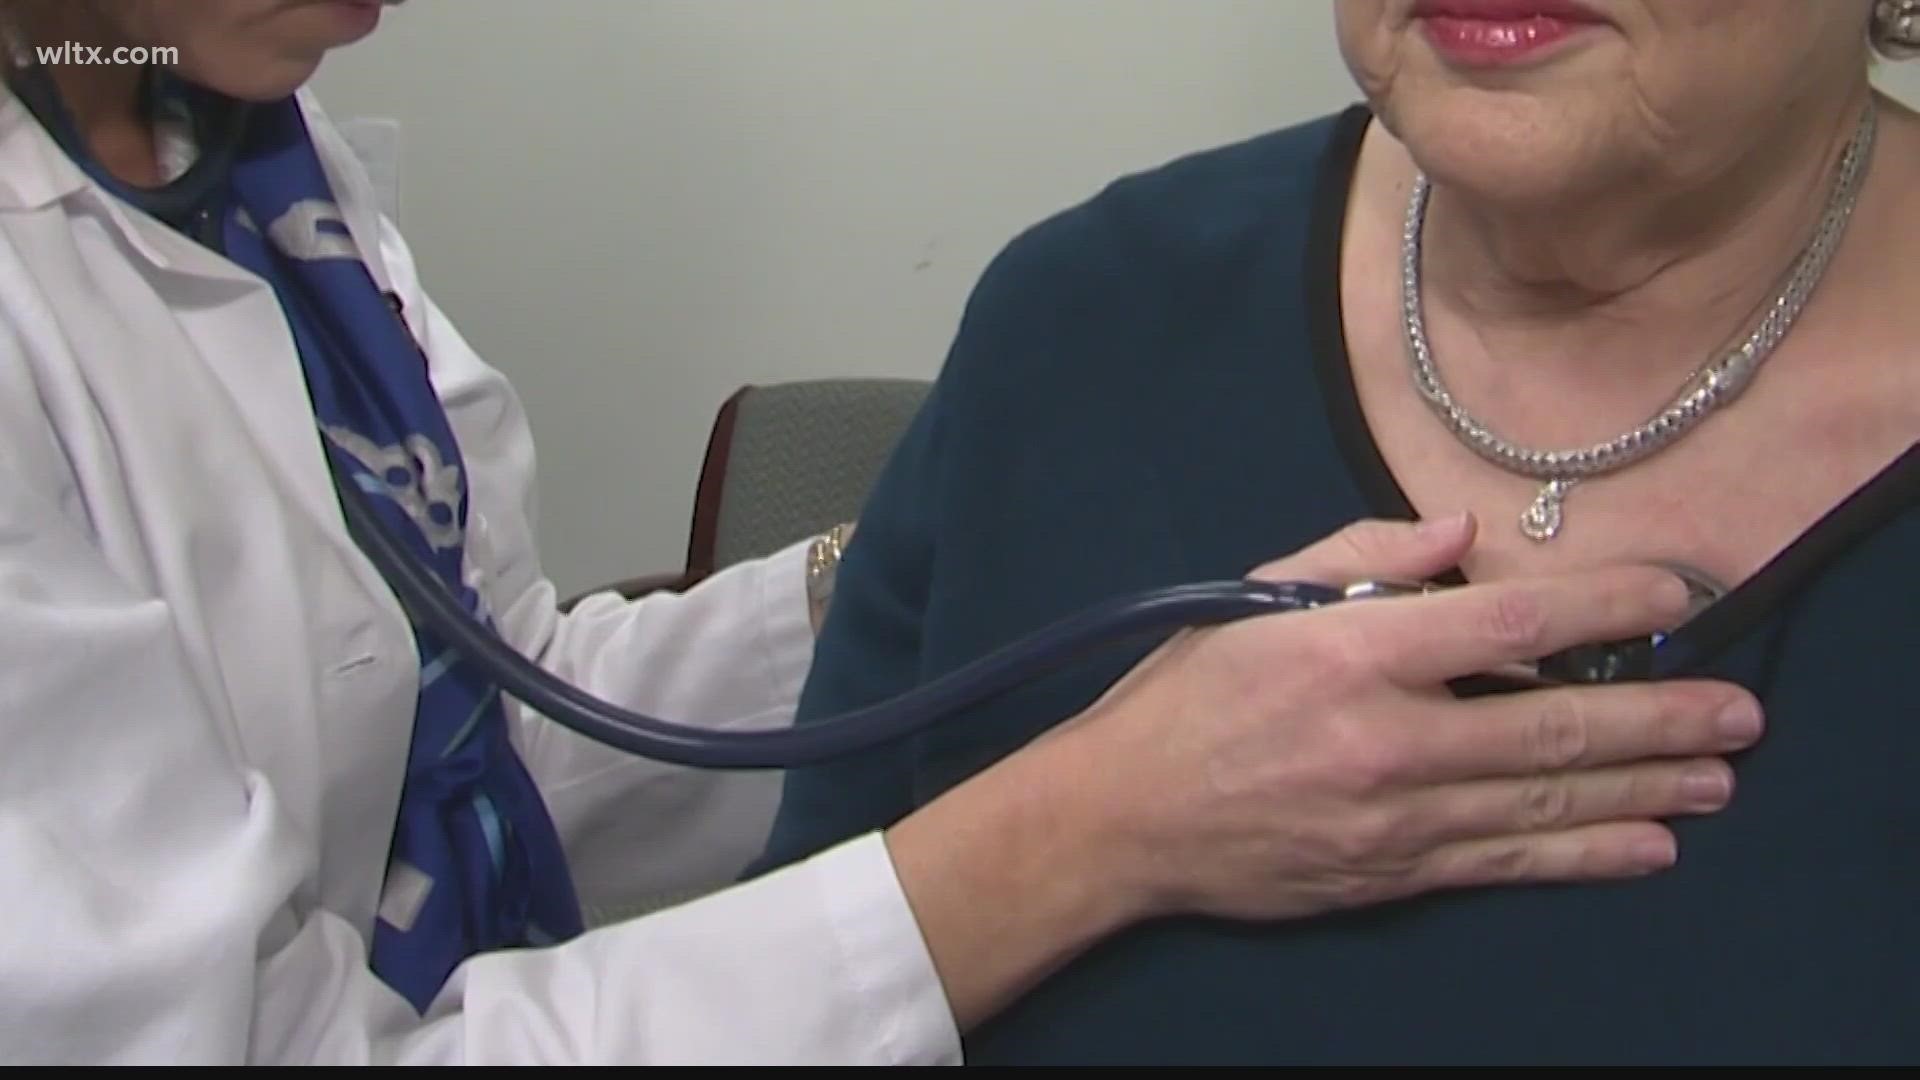 According to DHEC deaths related to heart disease claimed more than 11,000 lives in 2020.